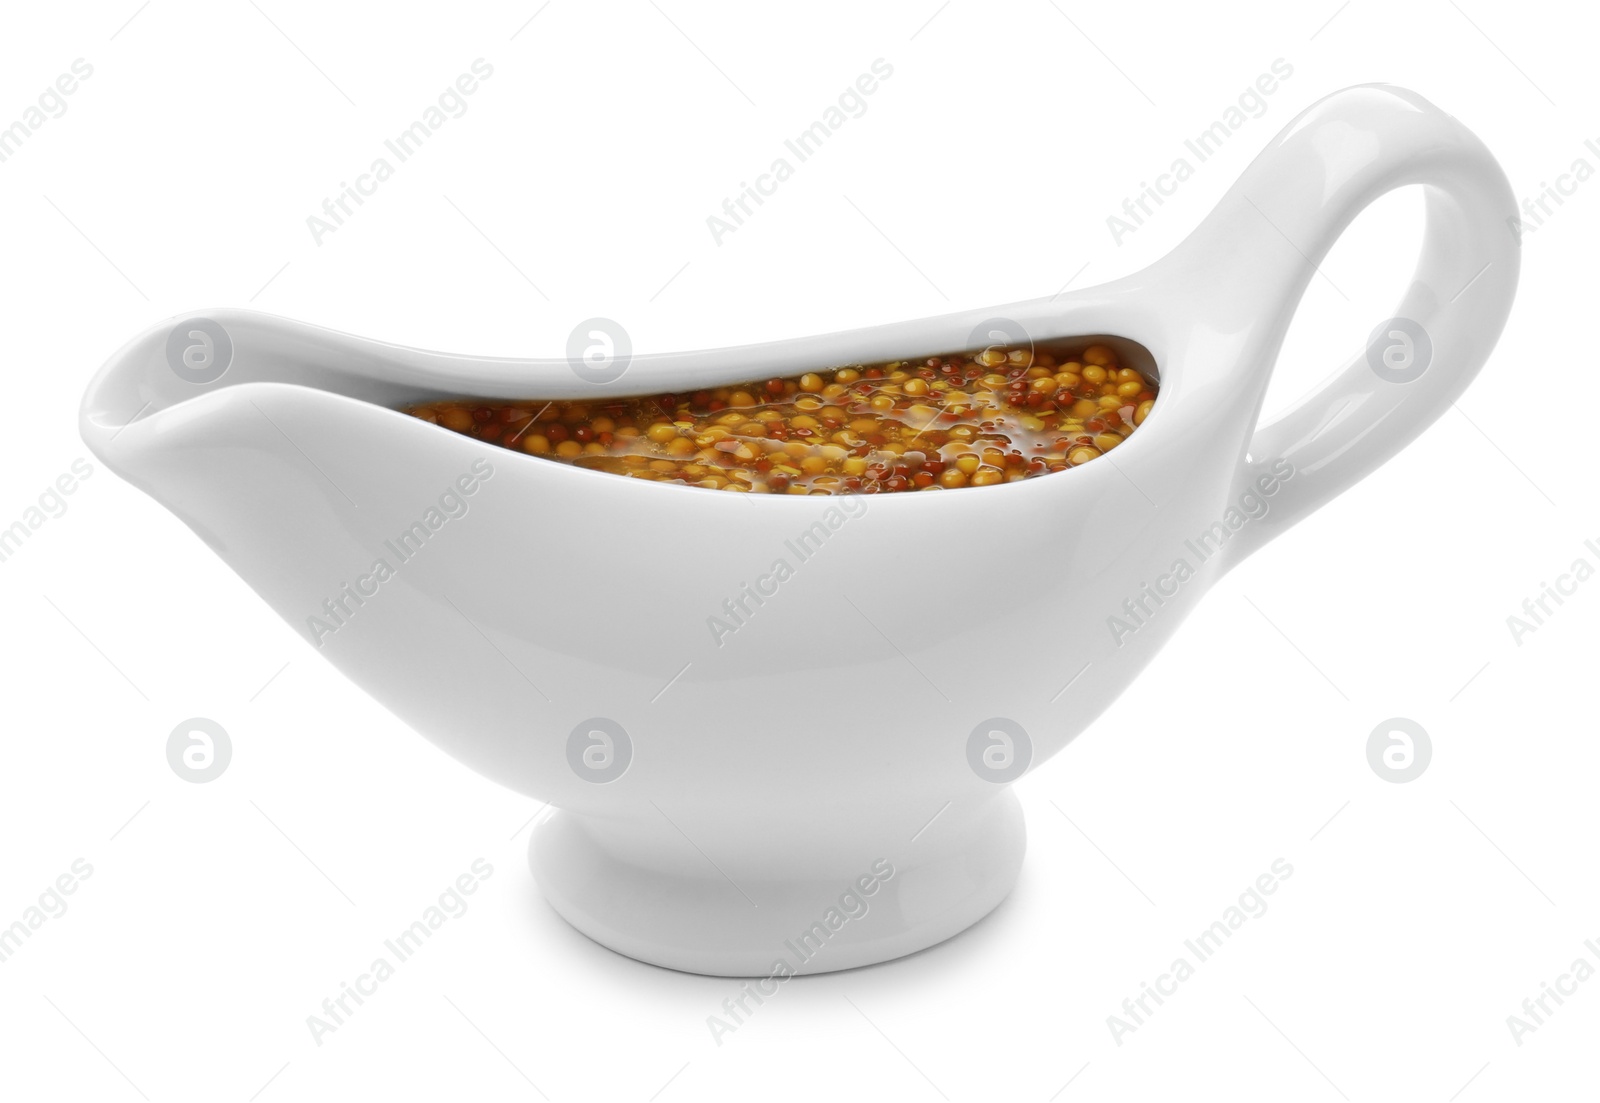 Photo of Ceramic boat with whole grain mustard sauce isolated on white